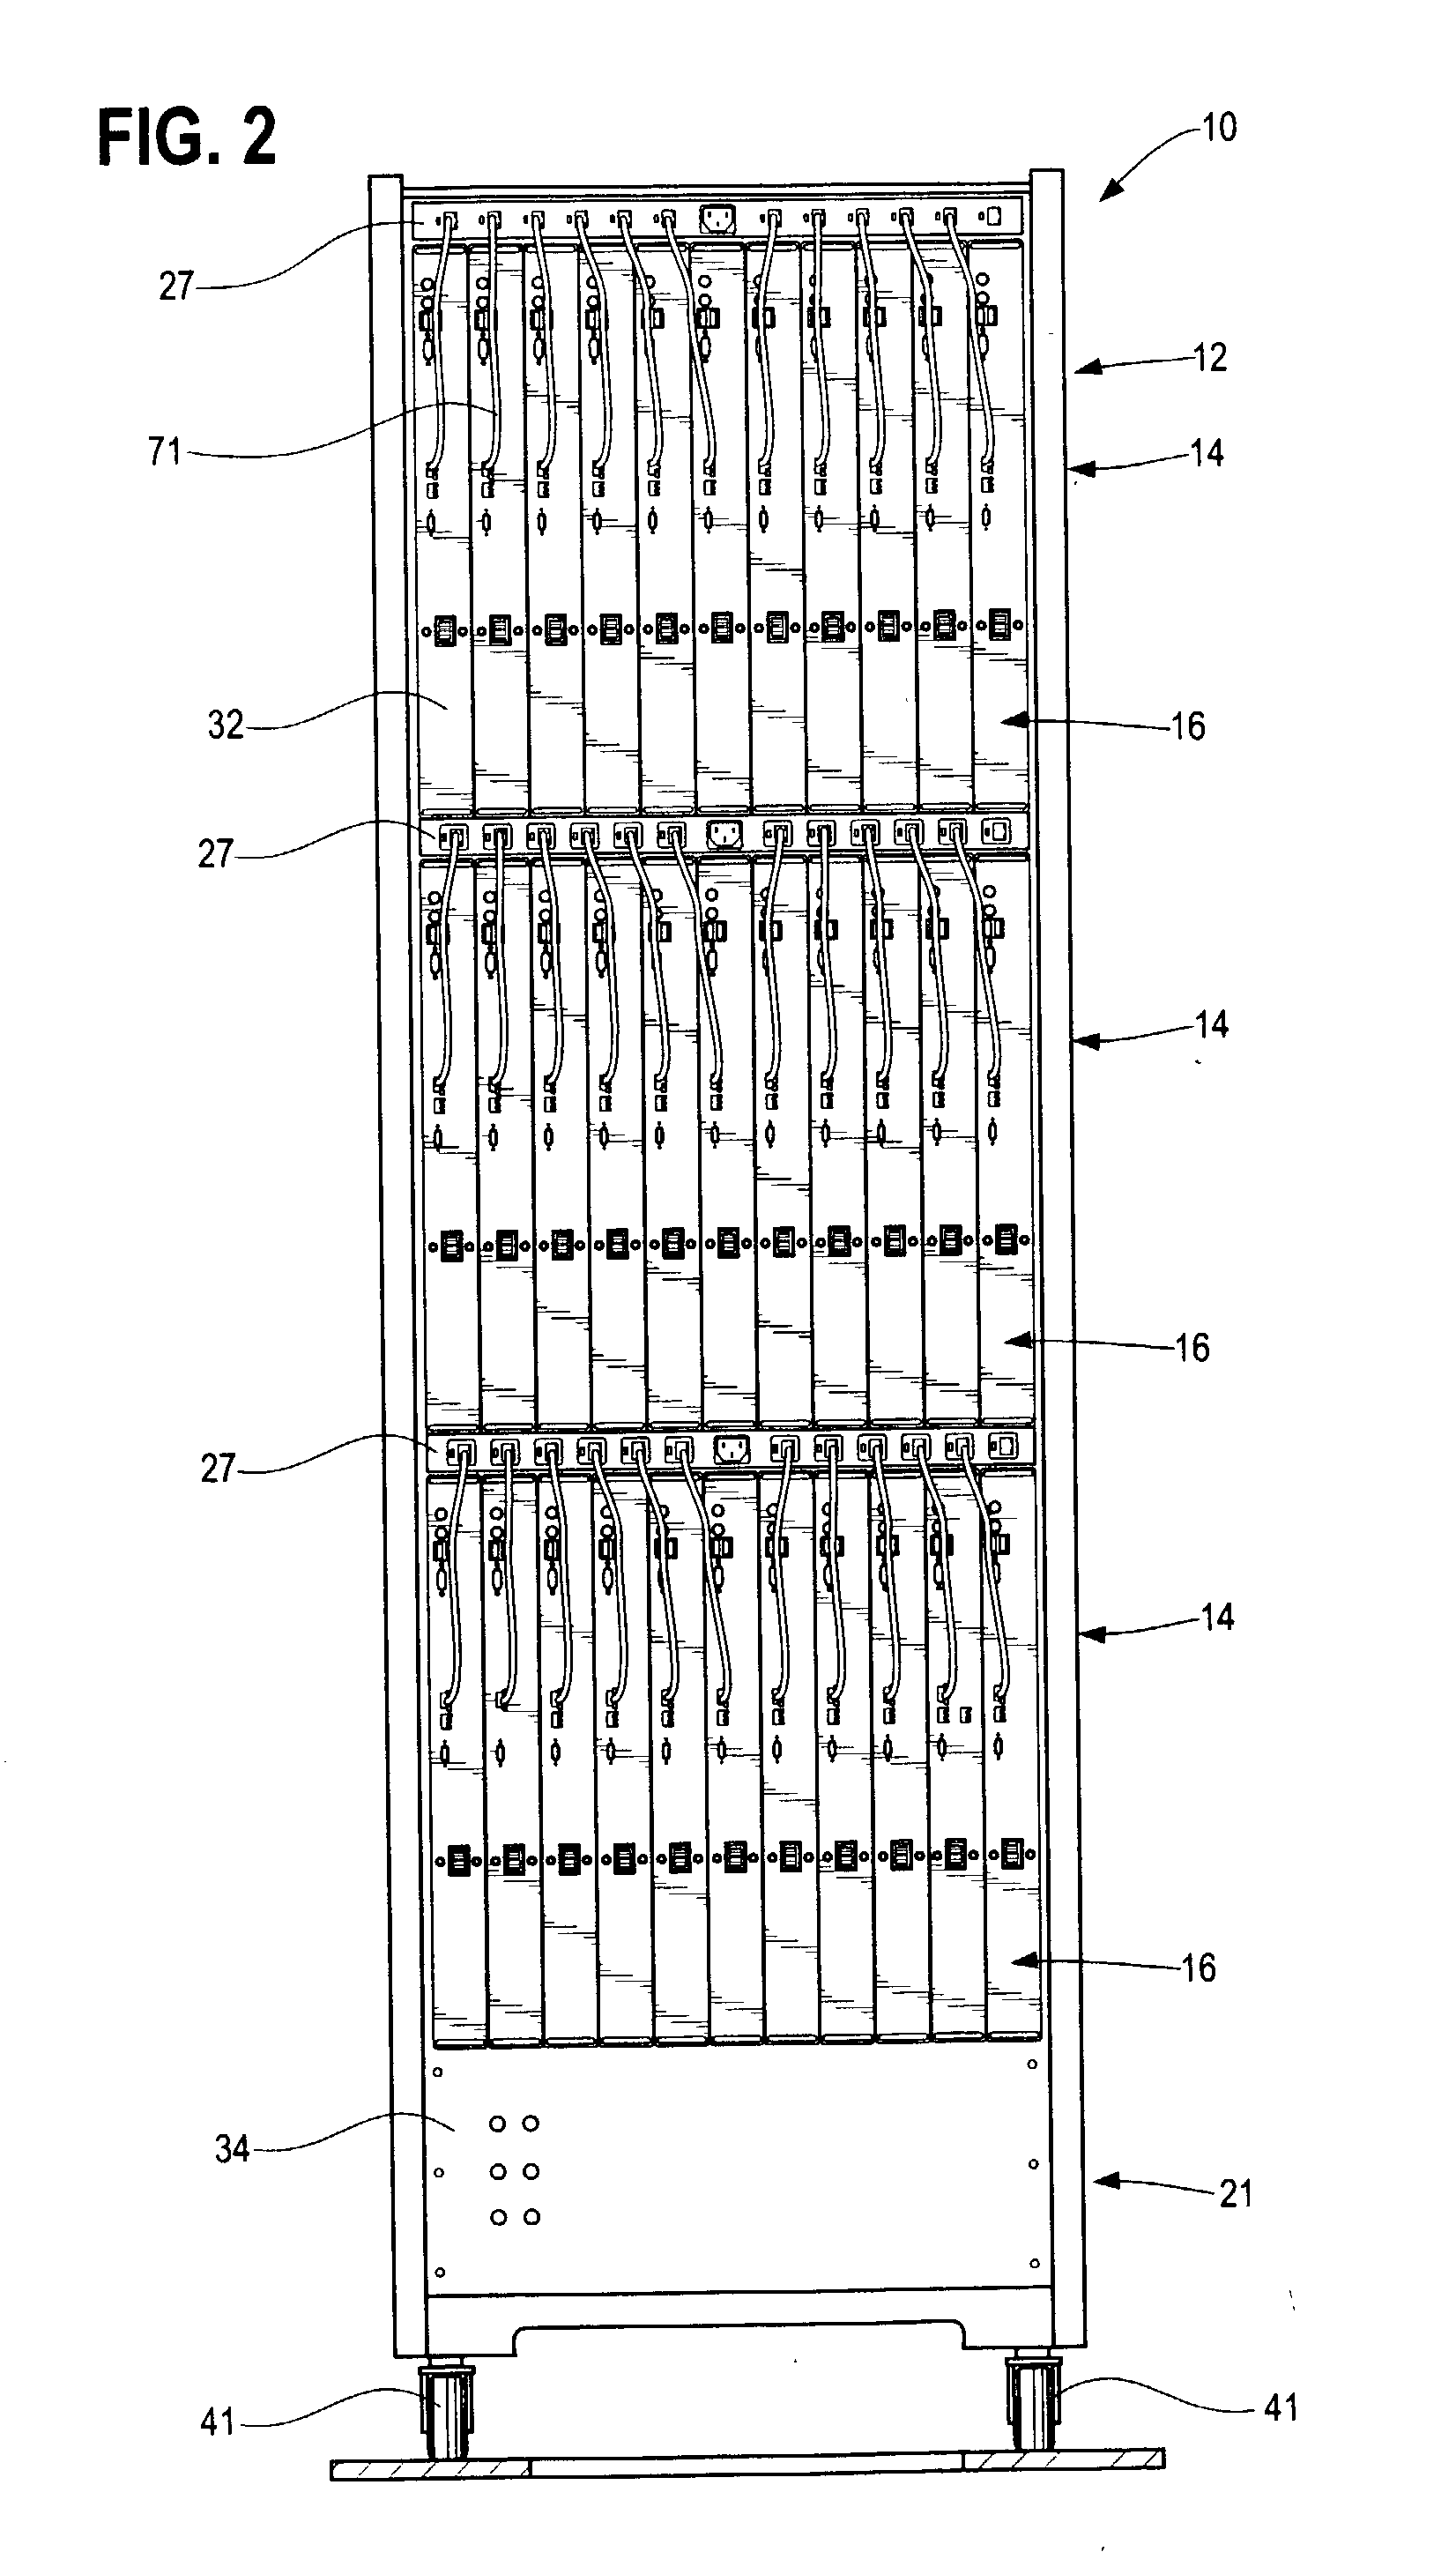 Method and apparatus for rack mounting computer components